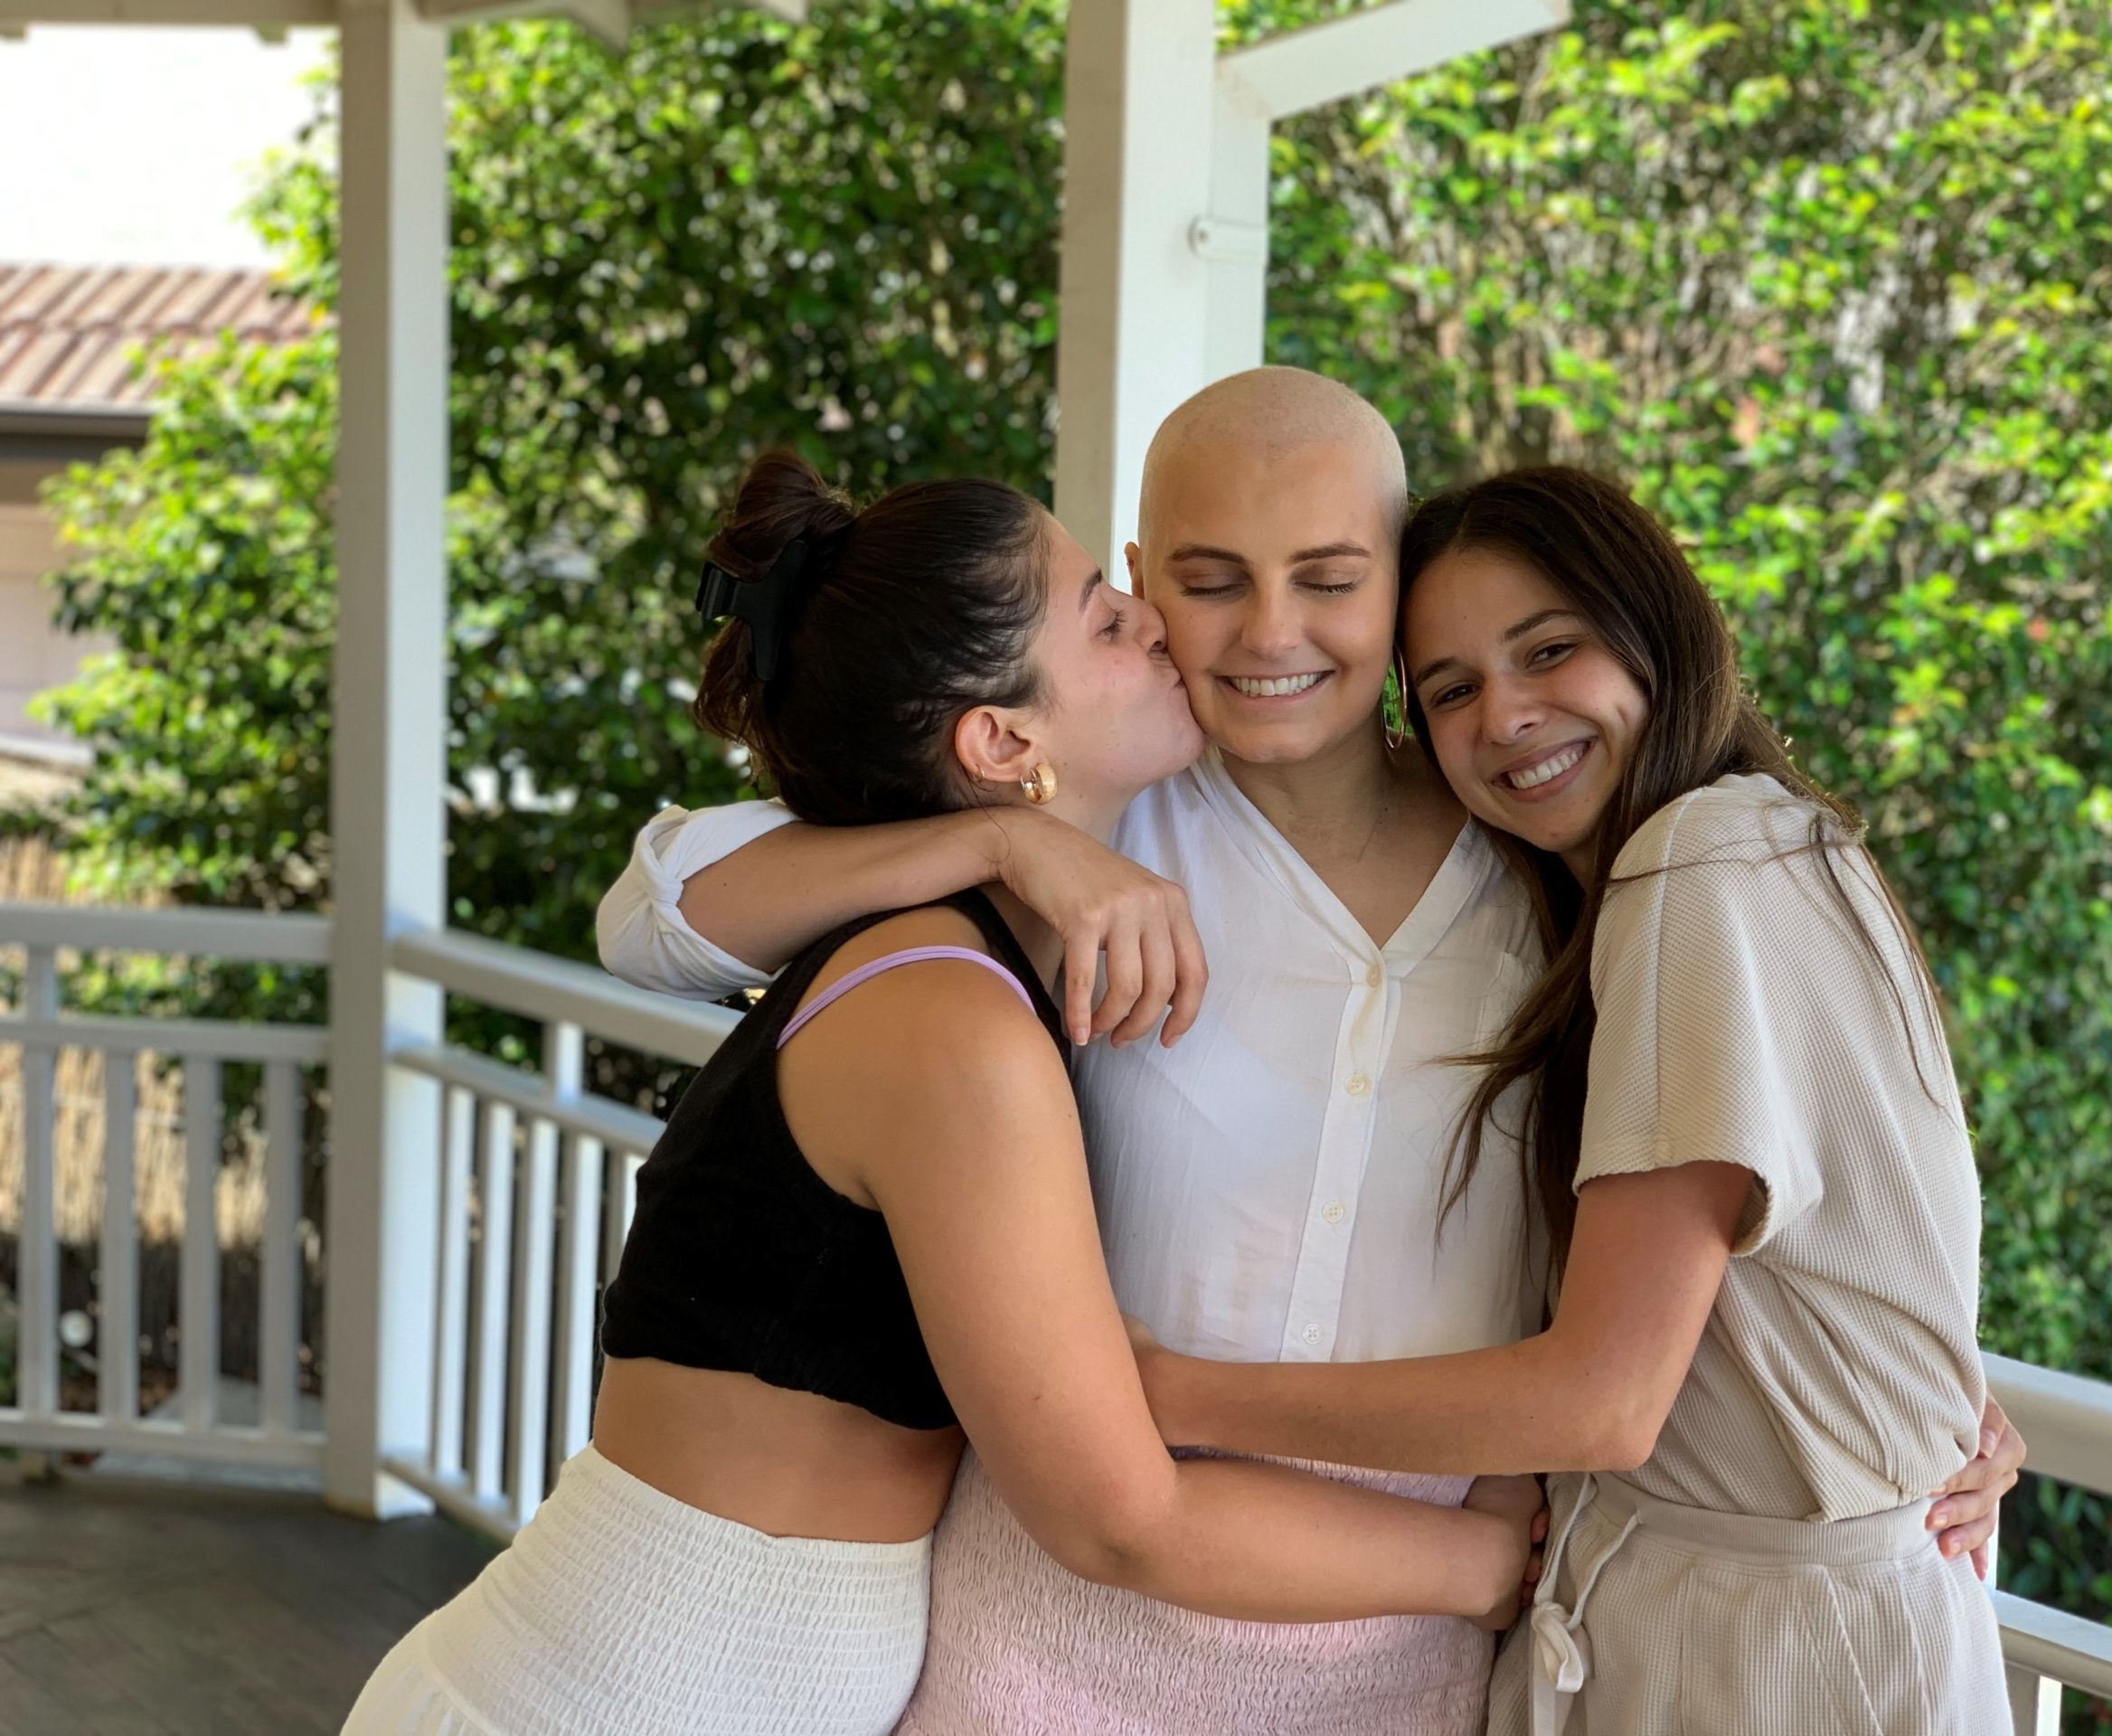 A smiling young woman being hugged by two friends